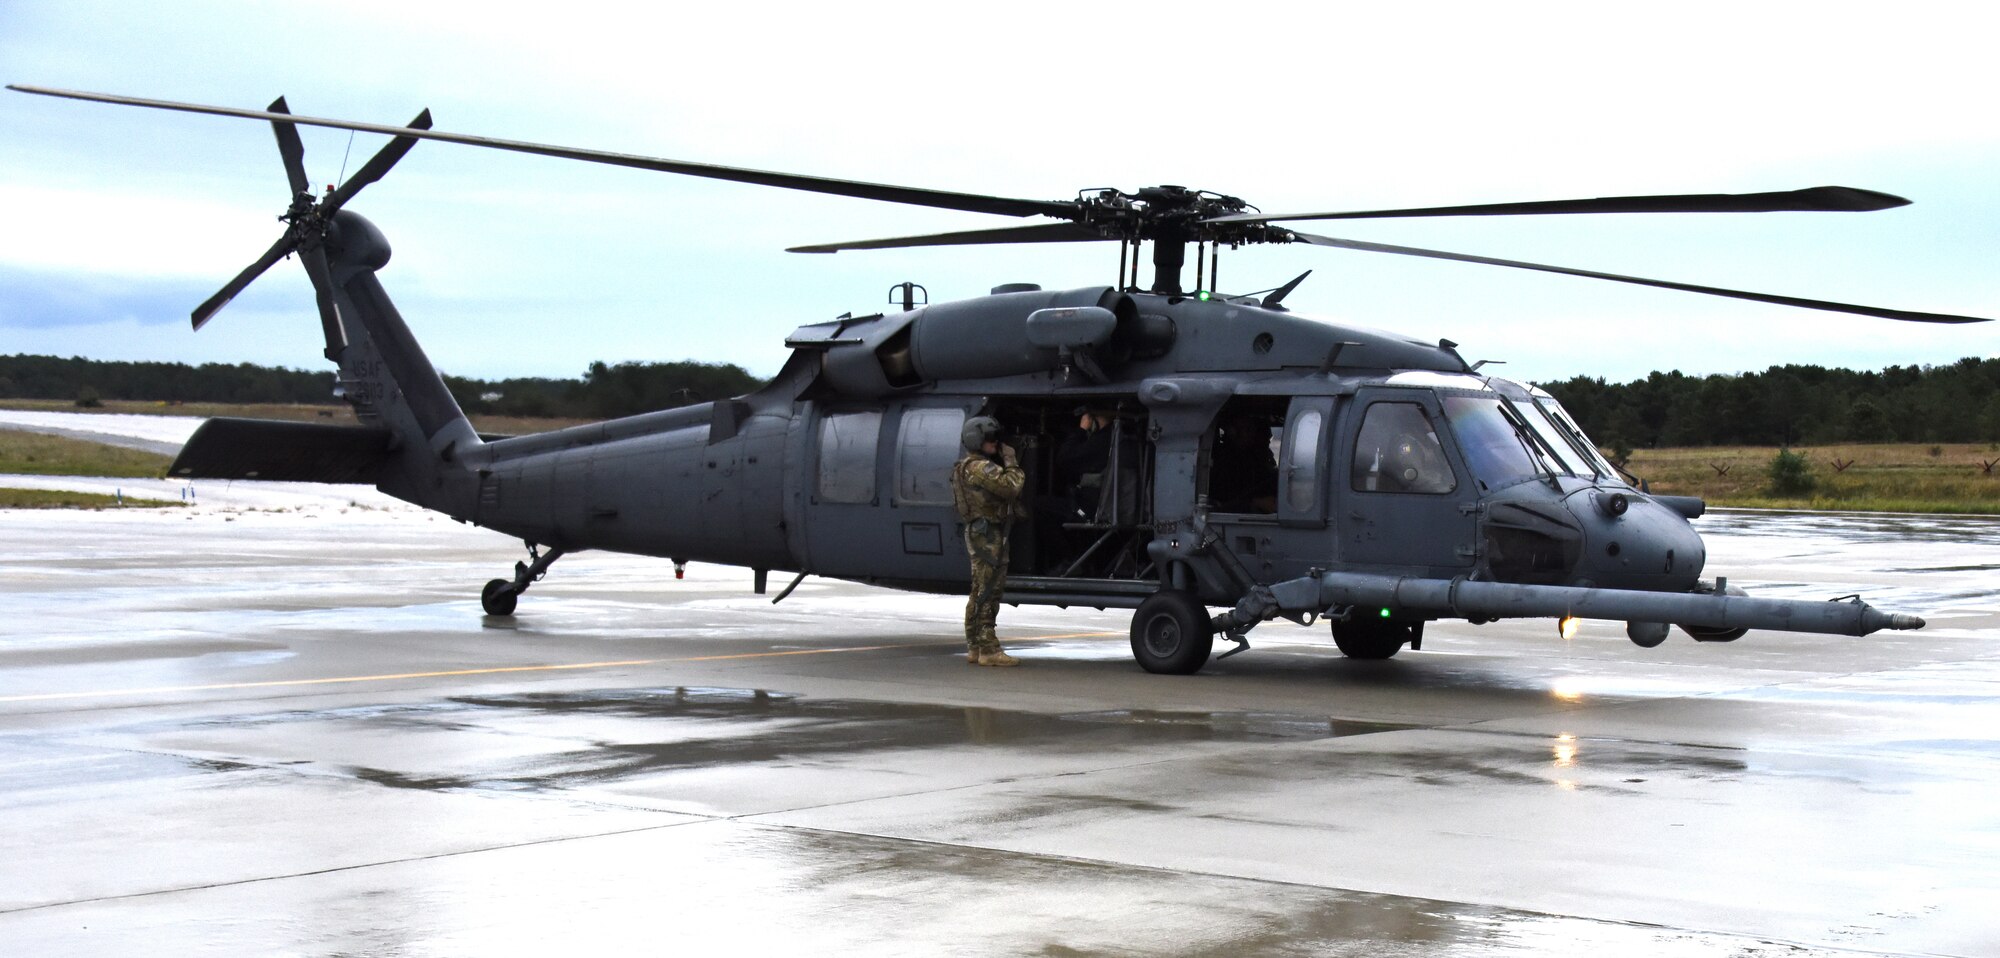 An HH-60G Pave Hawk helicopter from the 106th Rescue Wing assigned to the New York Air National Guard, sits before takeoff loaded with civilian employer passengers at Francis S. Gabreski Air National Guard Base, N.Y., Oct. 13, 2018.